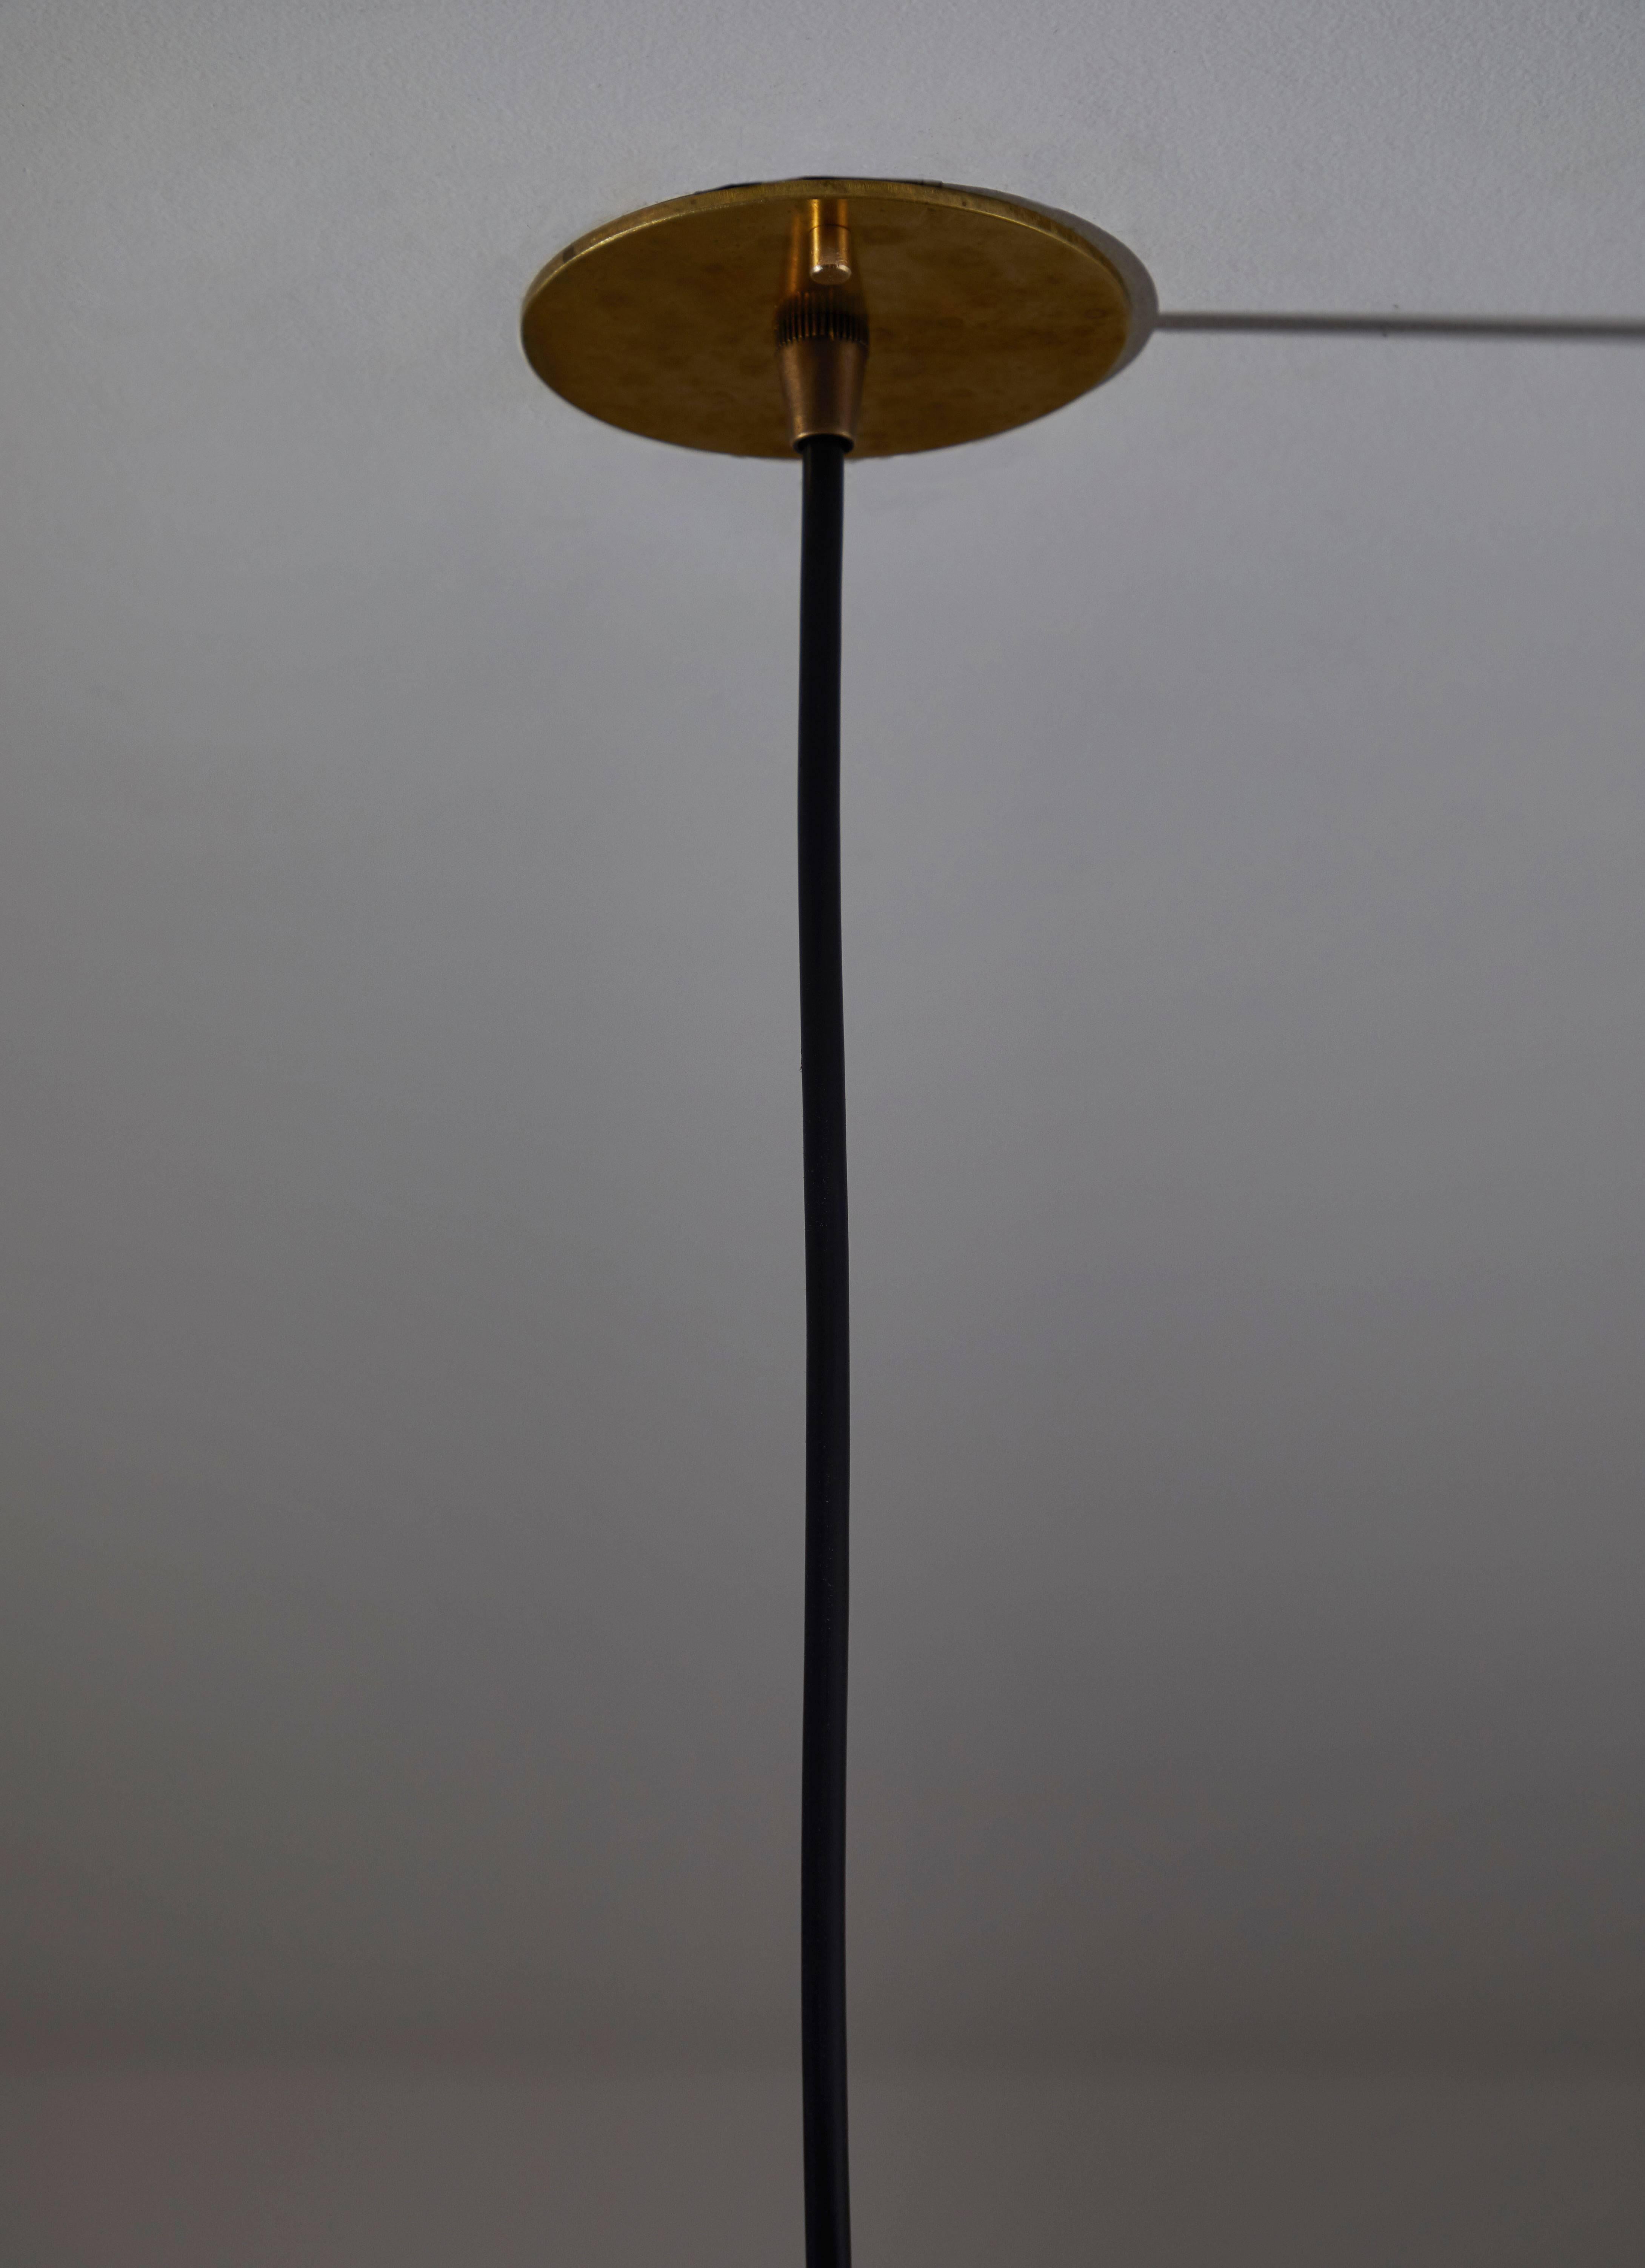 Flor Di Loto Pendant Lamp by Afra & Tobia Scarpa for Flos 2